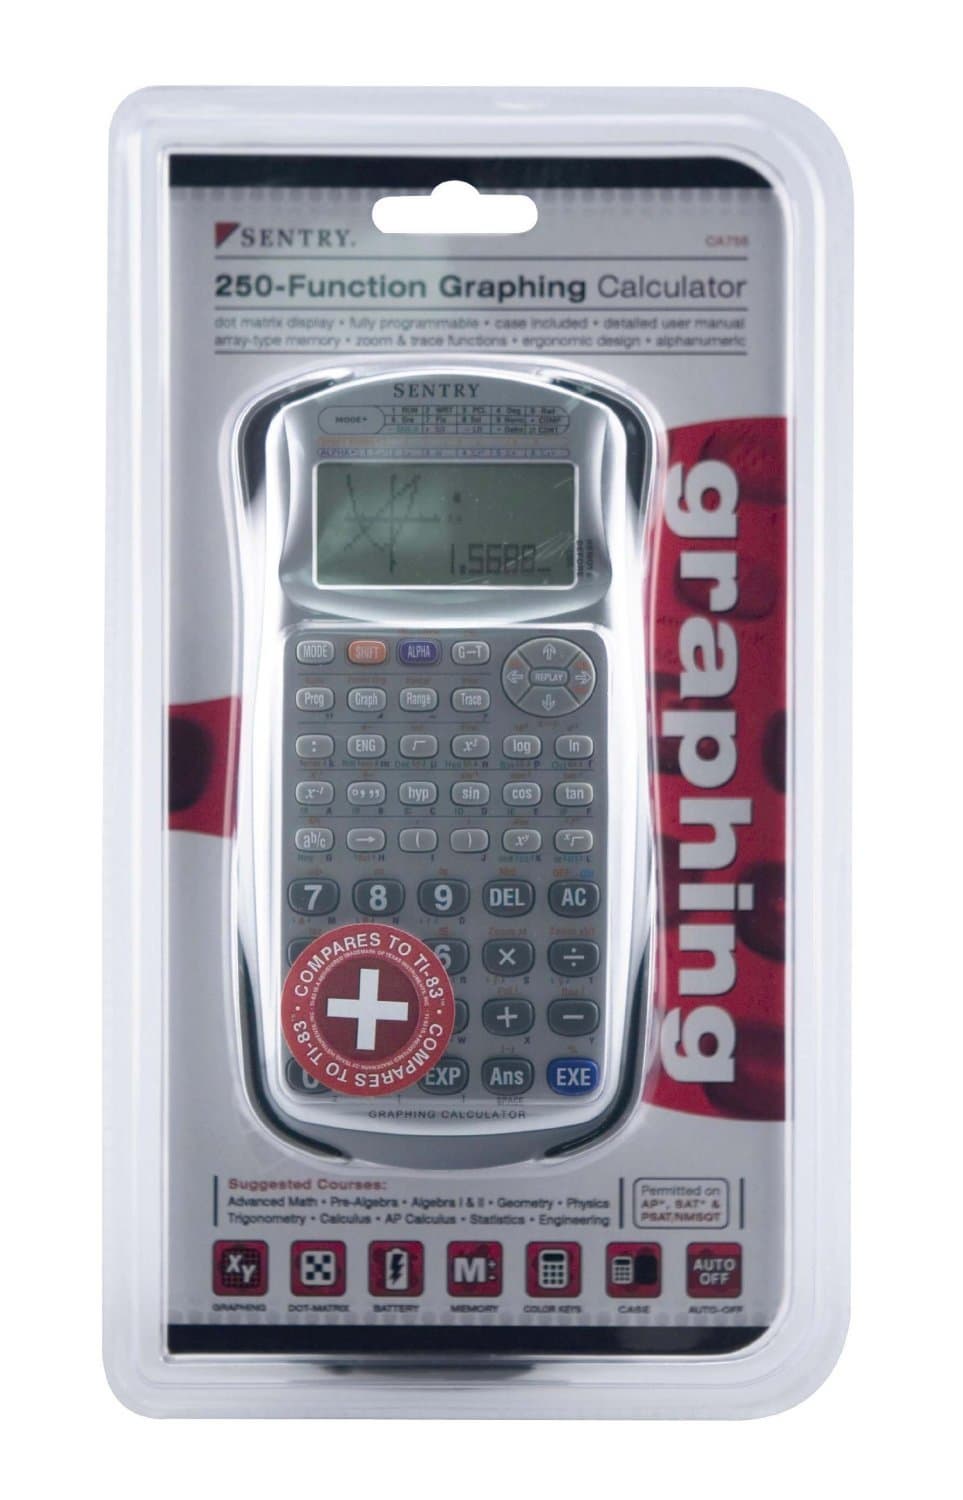 Sentry 250-Function Graphing Calculator